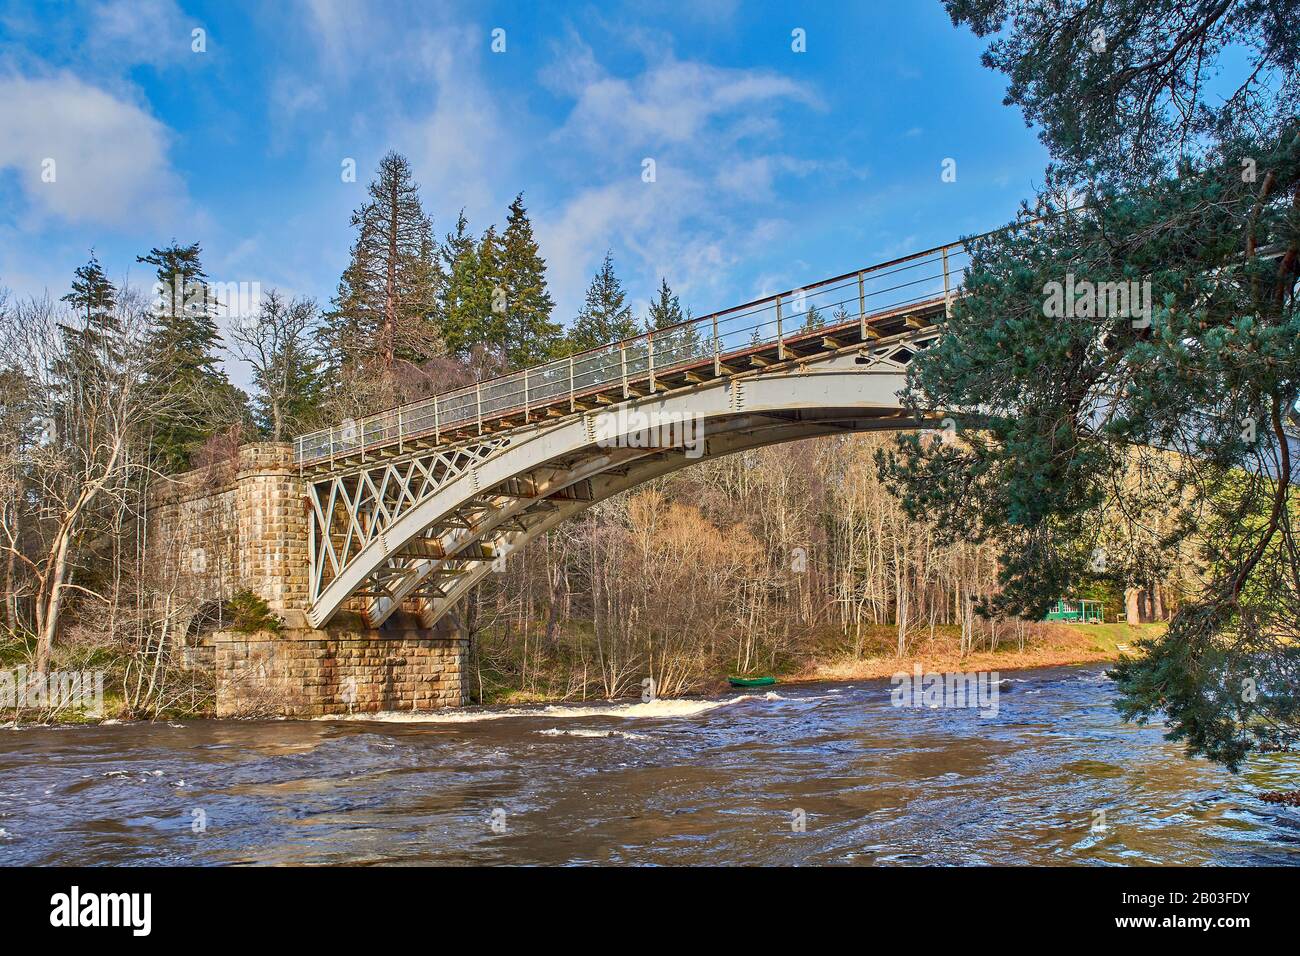 CARRON VILLAGE MORAY SCOTLAND A VIEW OF THE STRUCTURE OF UNIQUE CARRON ROAD AND OLD RAIL BRIDGE WHICH CROSSES THE RIVER SPEY AND A GREEN FISHING HUT A Stock Photo